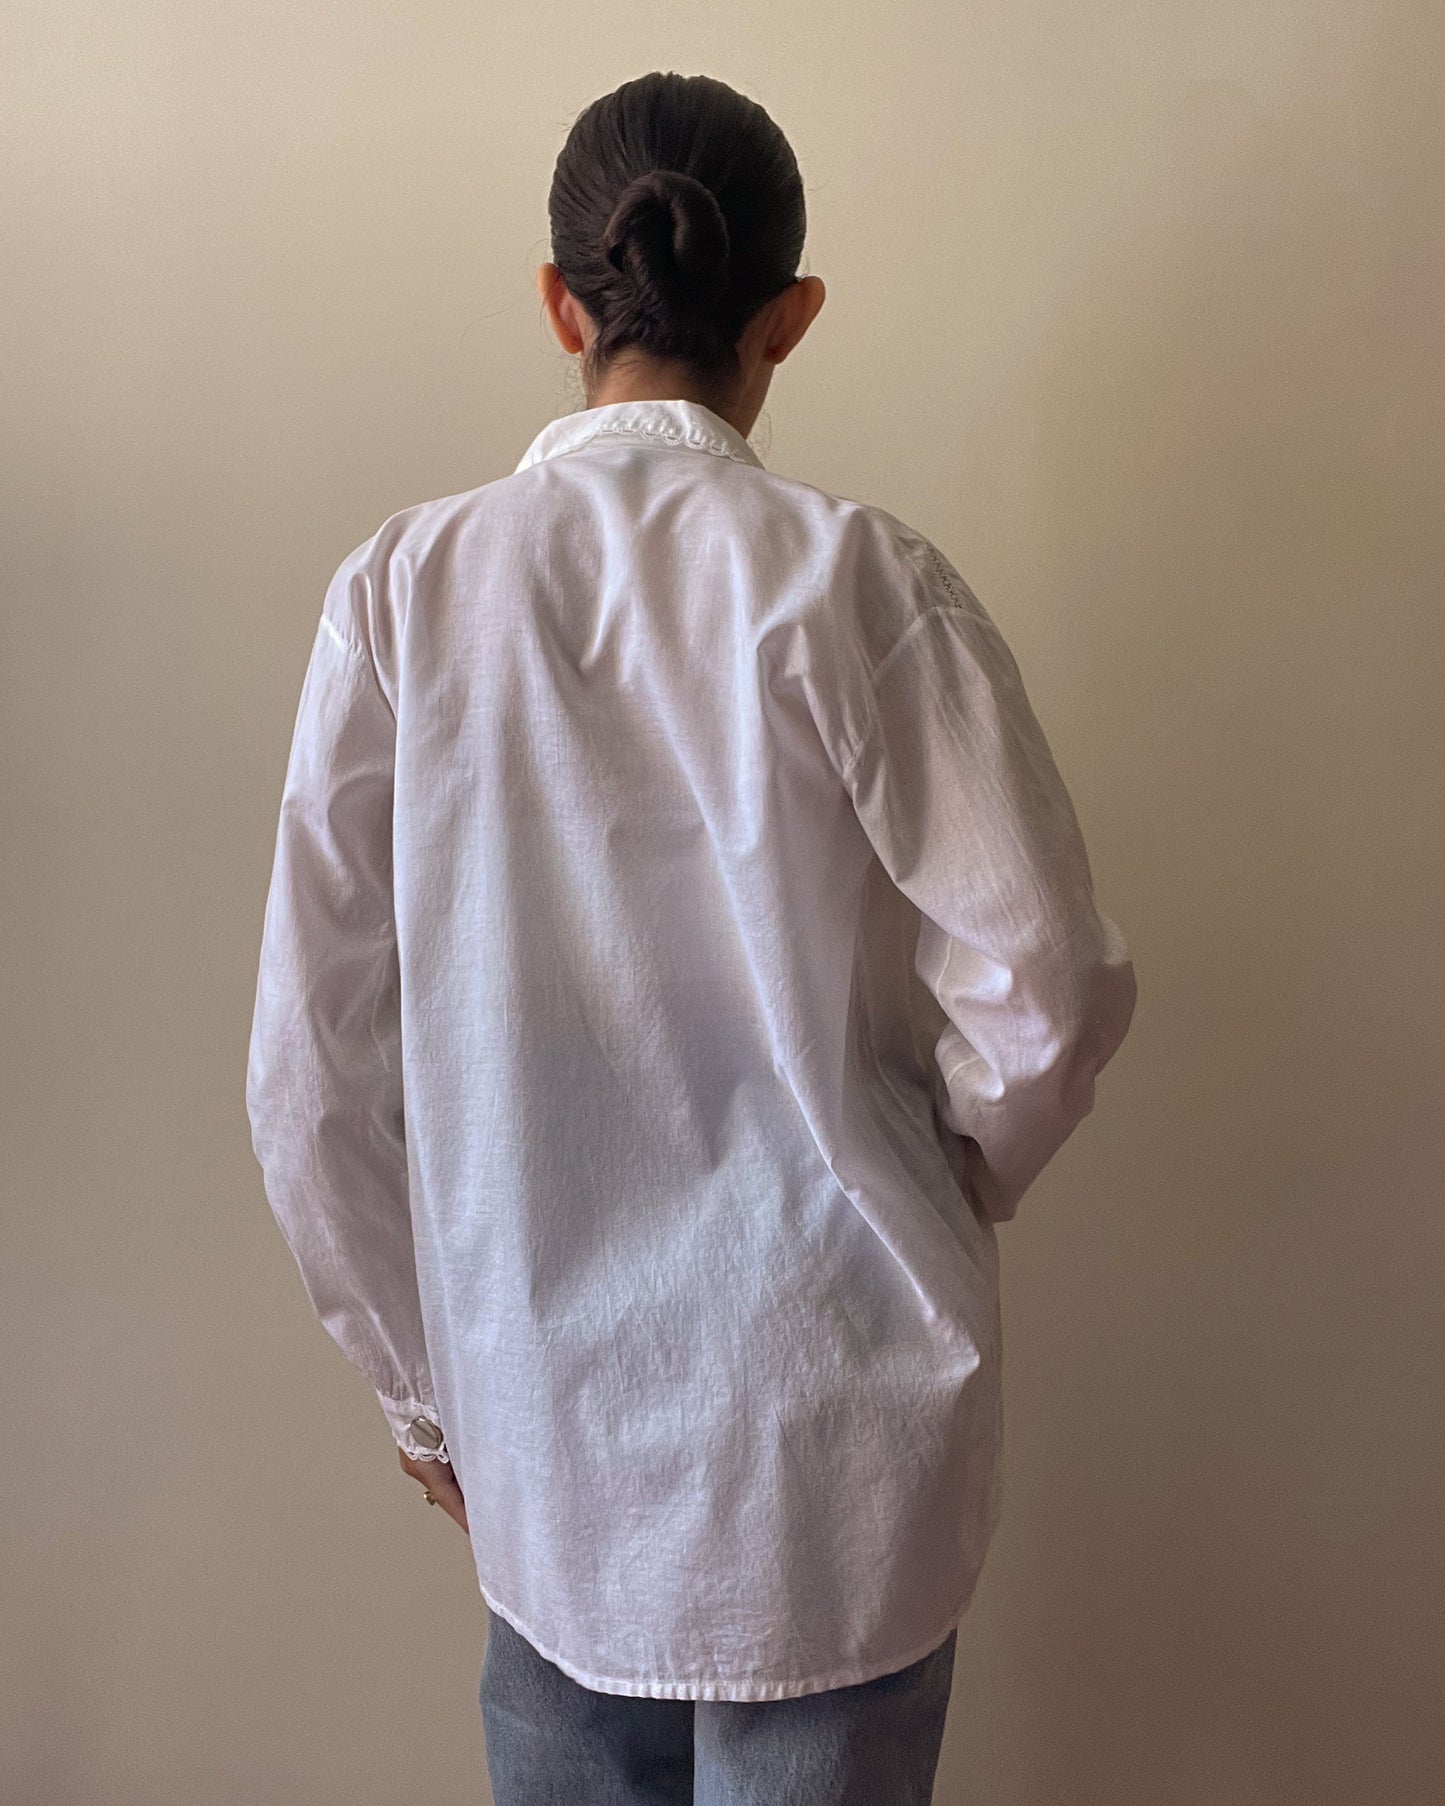 Vintage Relaxed Cufflink Shirt in White Cotton